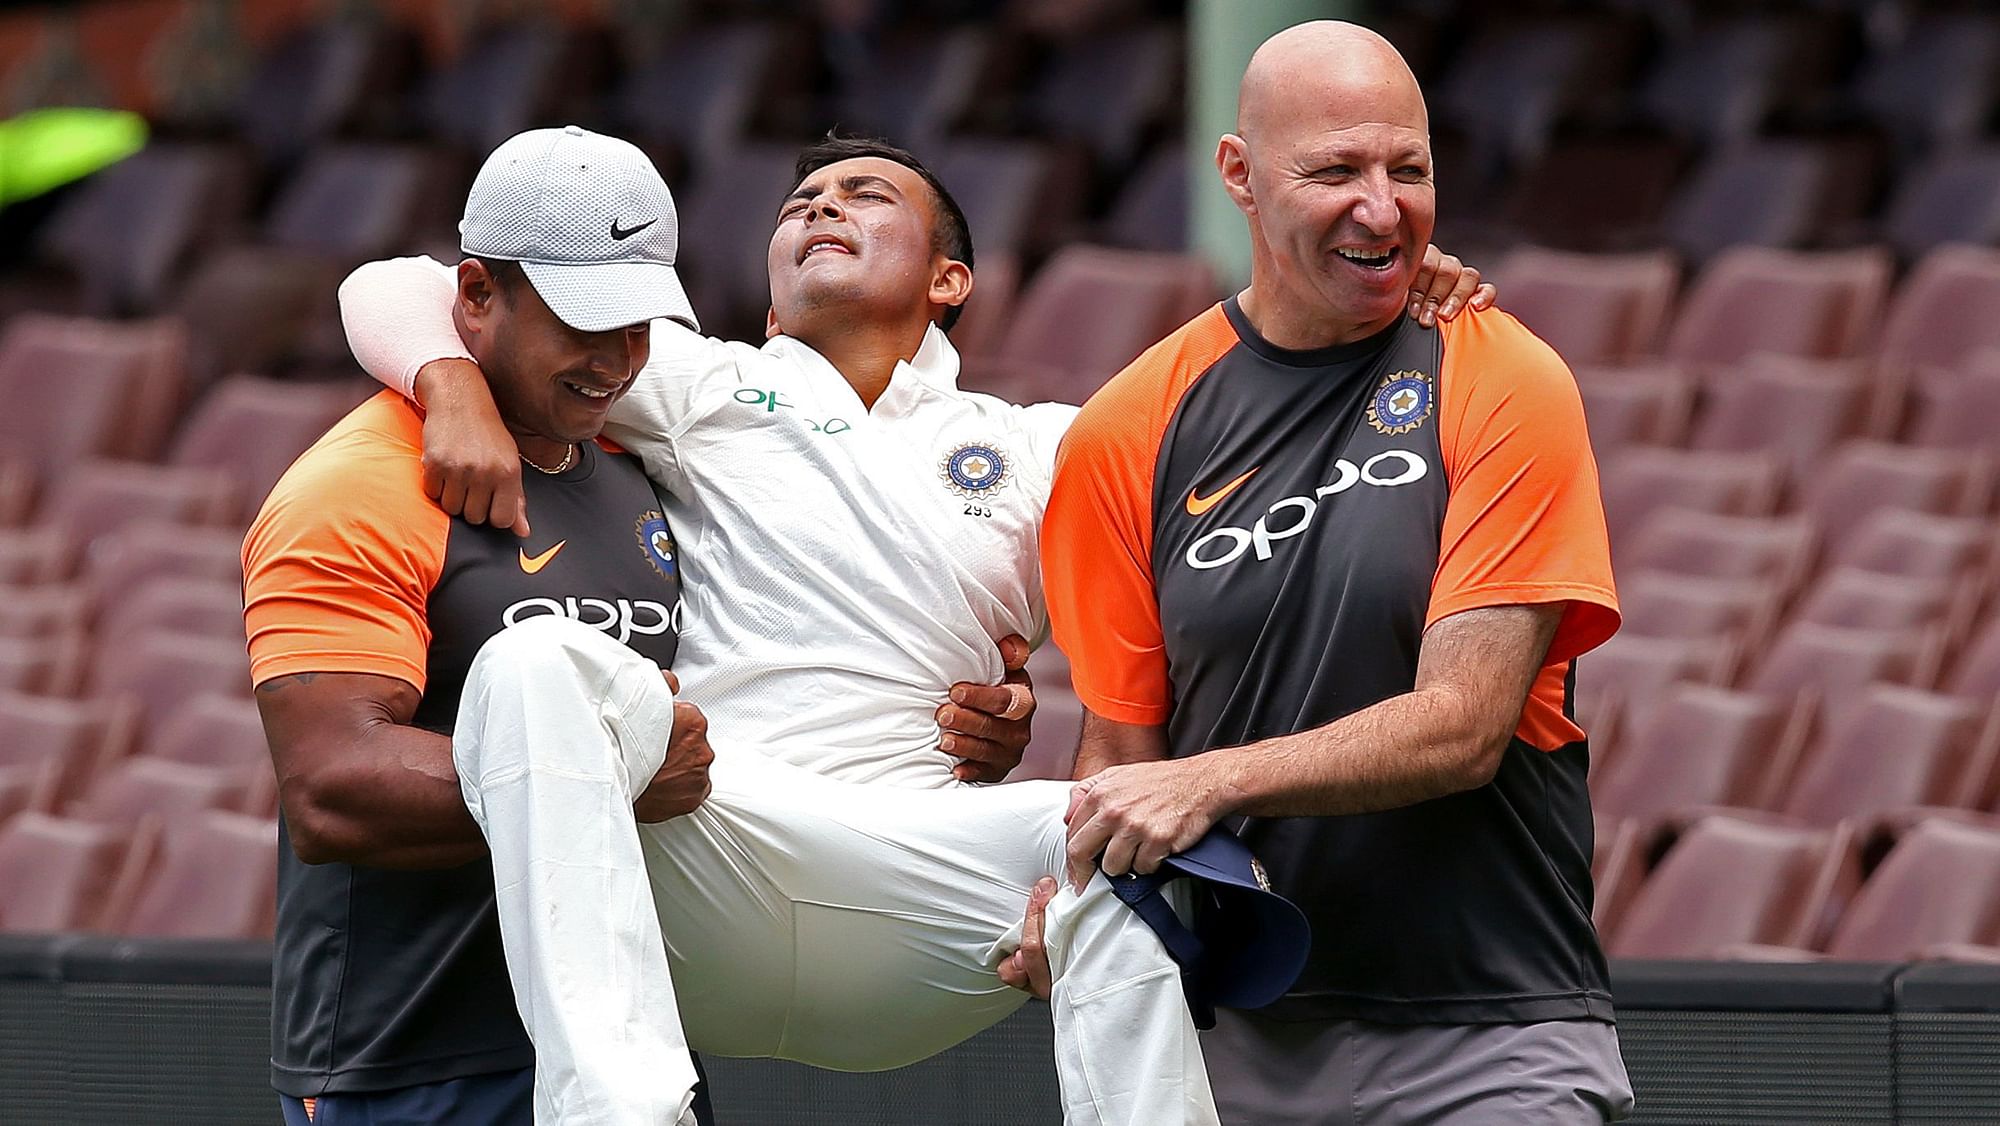 Prithvi Shaw had to be carried off the field after injuring his left ankle on Day 3 of India’s warm-up game against CA XI at Sydney.